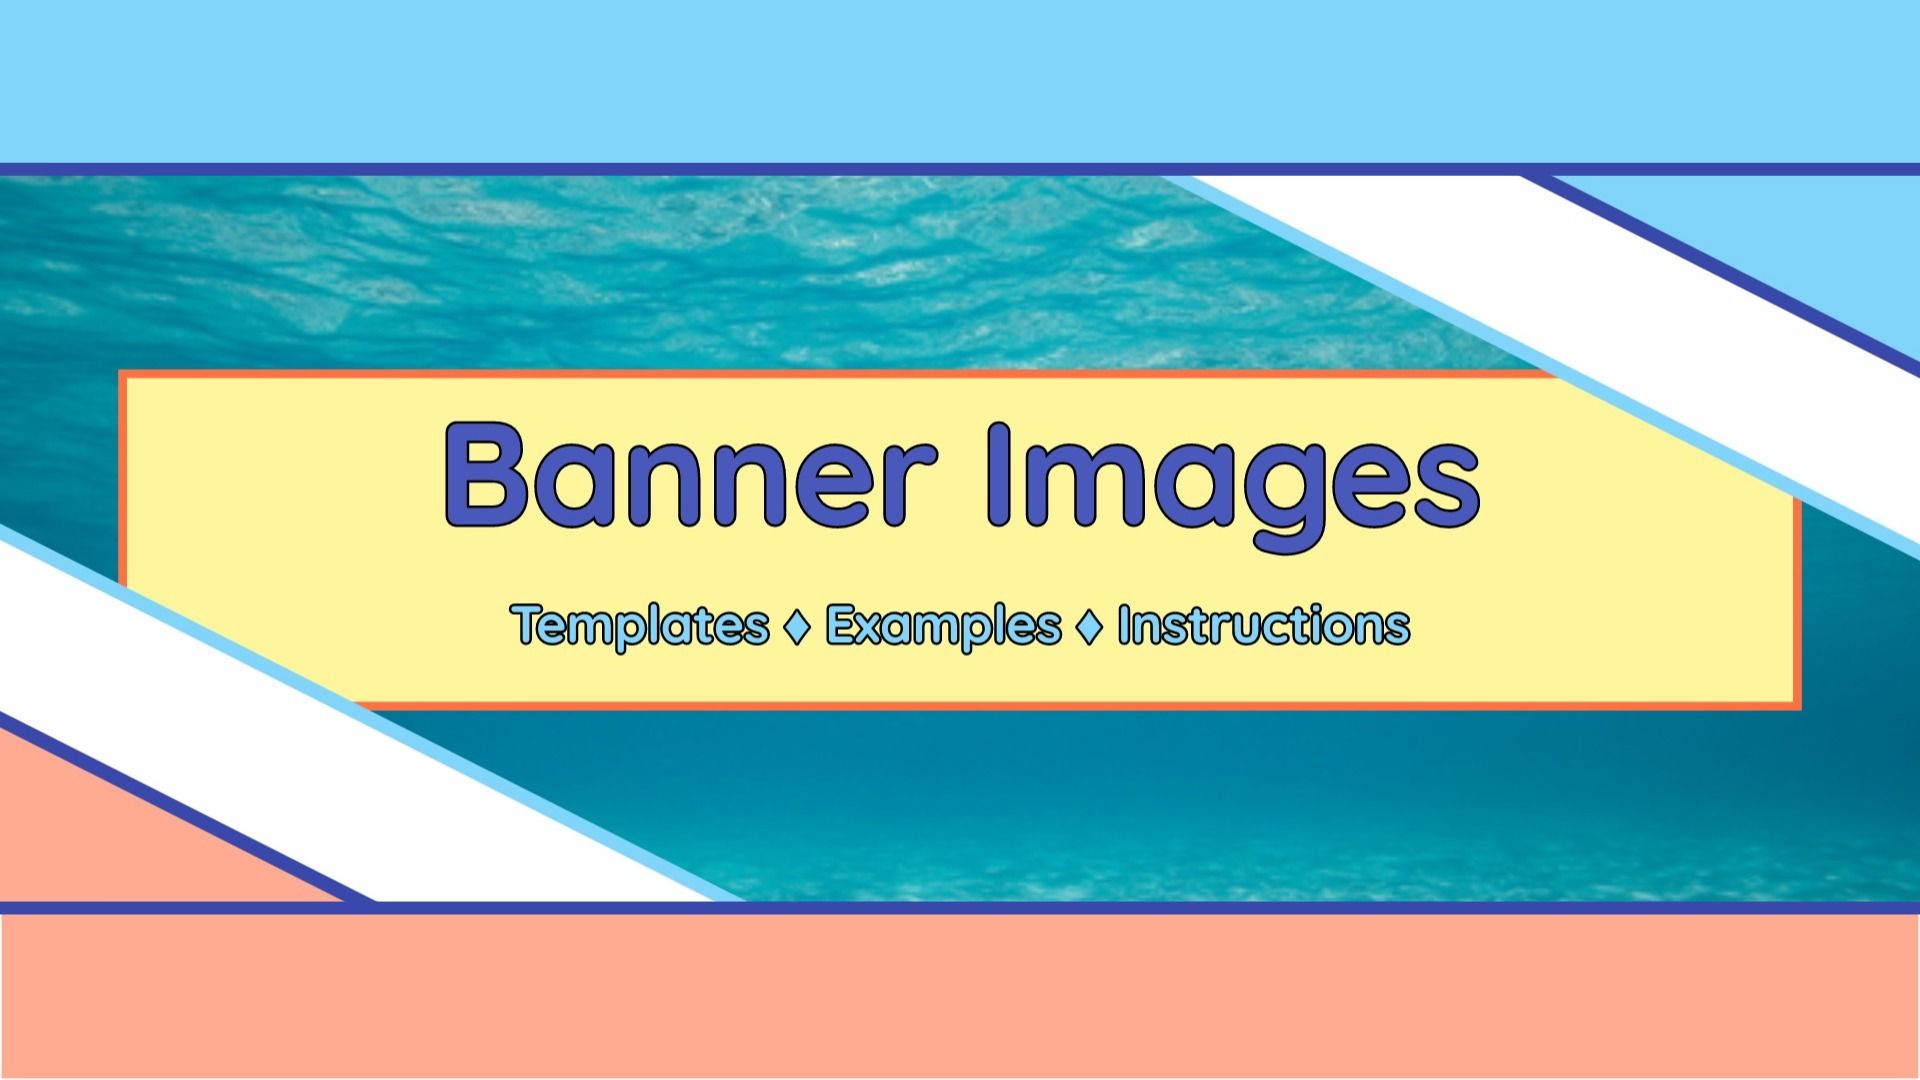 Banner Image: Templates, Examples, Instructions